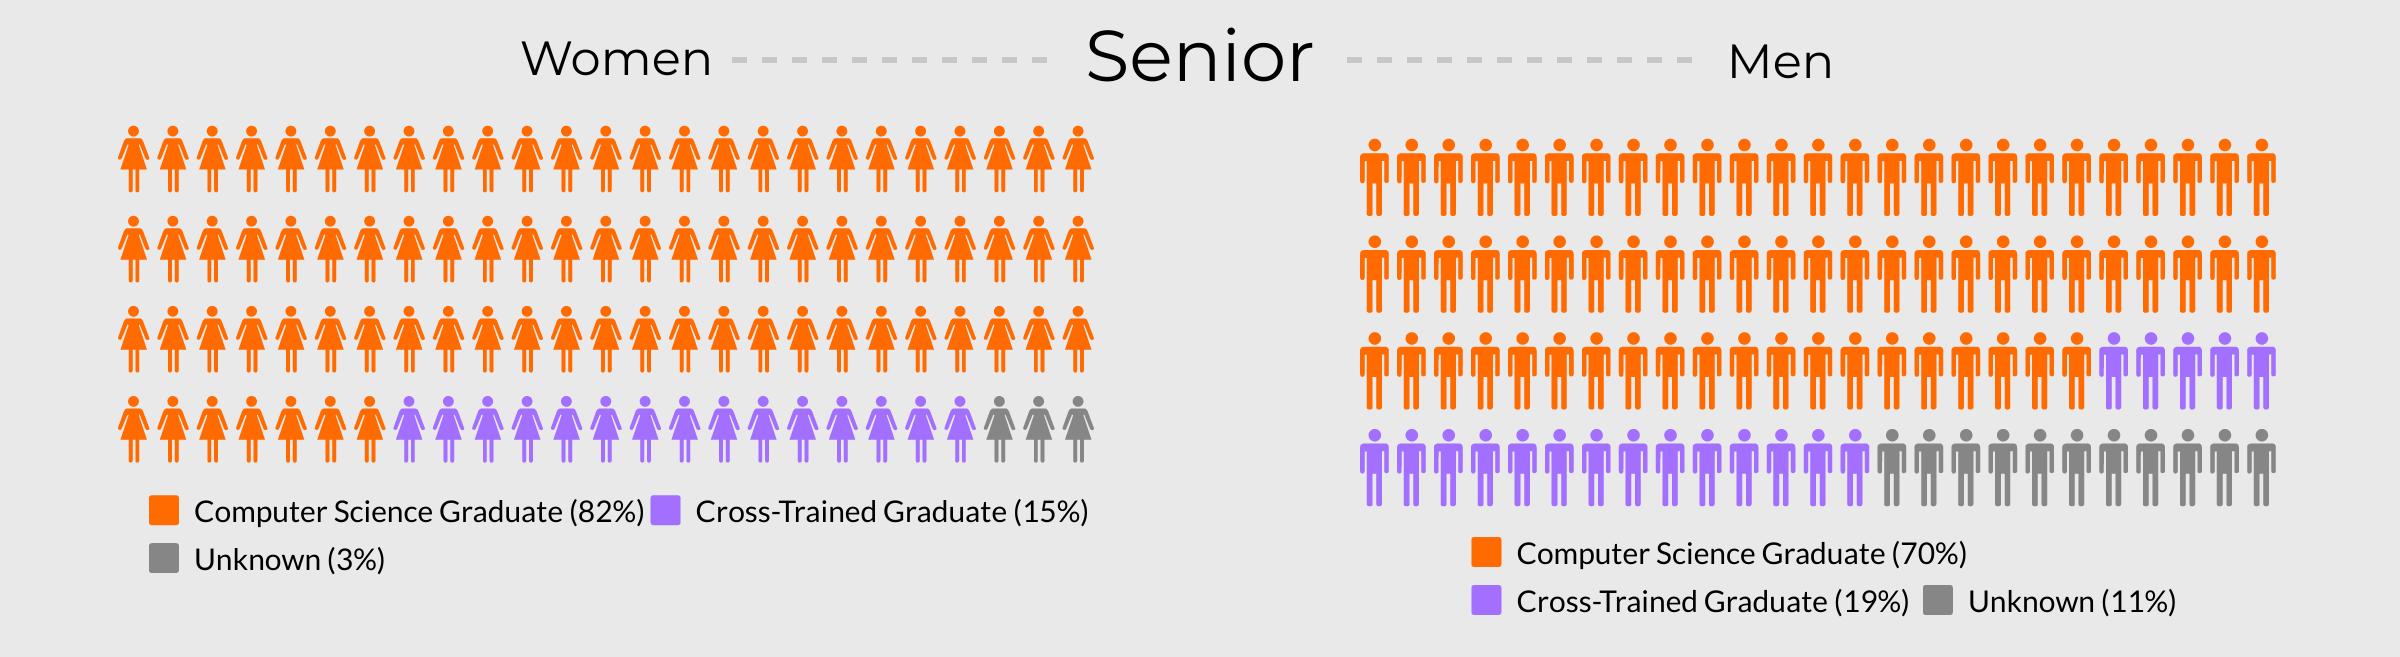 Visualisation comparing what percentage of Senior Ruby developers have a degree versus those who complete a bootcamp.